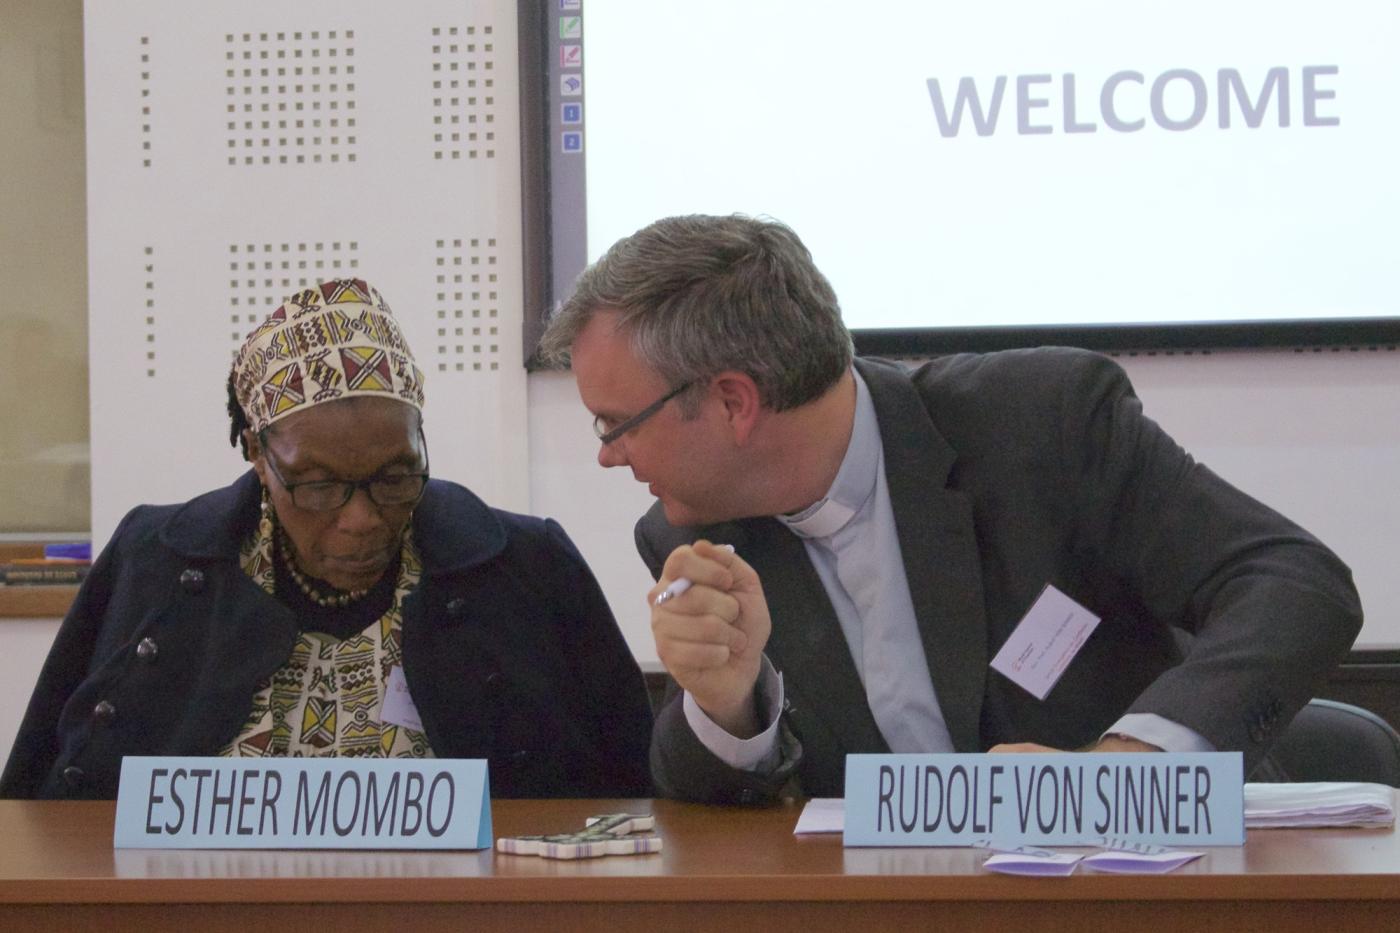 Prof. Dr Esther Mombo, CEEF vice-moderator, and Prof. Dr Rudolf von Sinner, moderator of the CEEF. © Marcelo Schneider/WCC